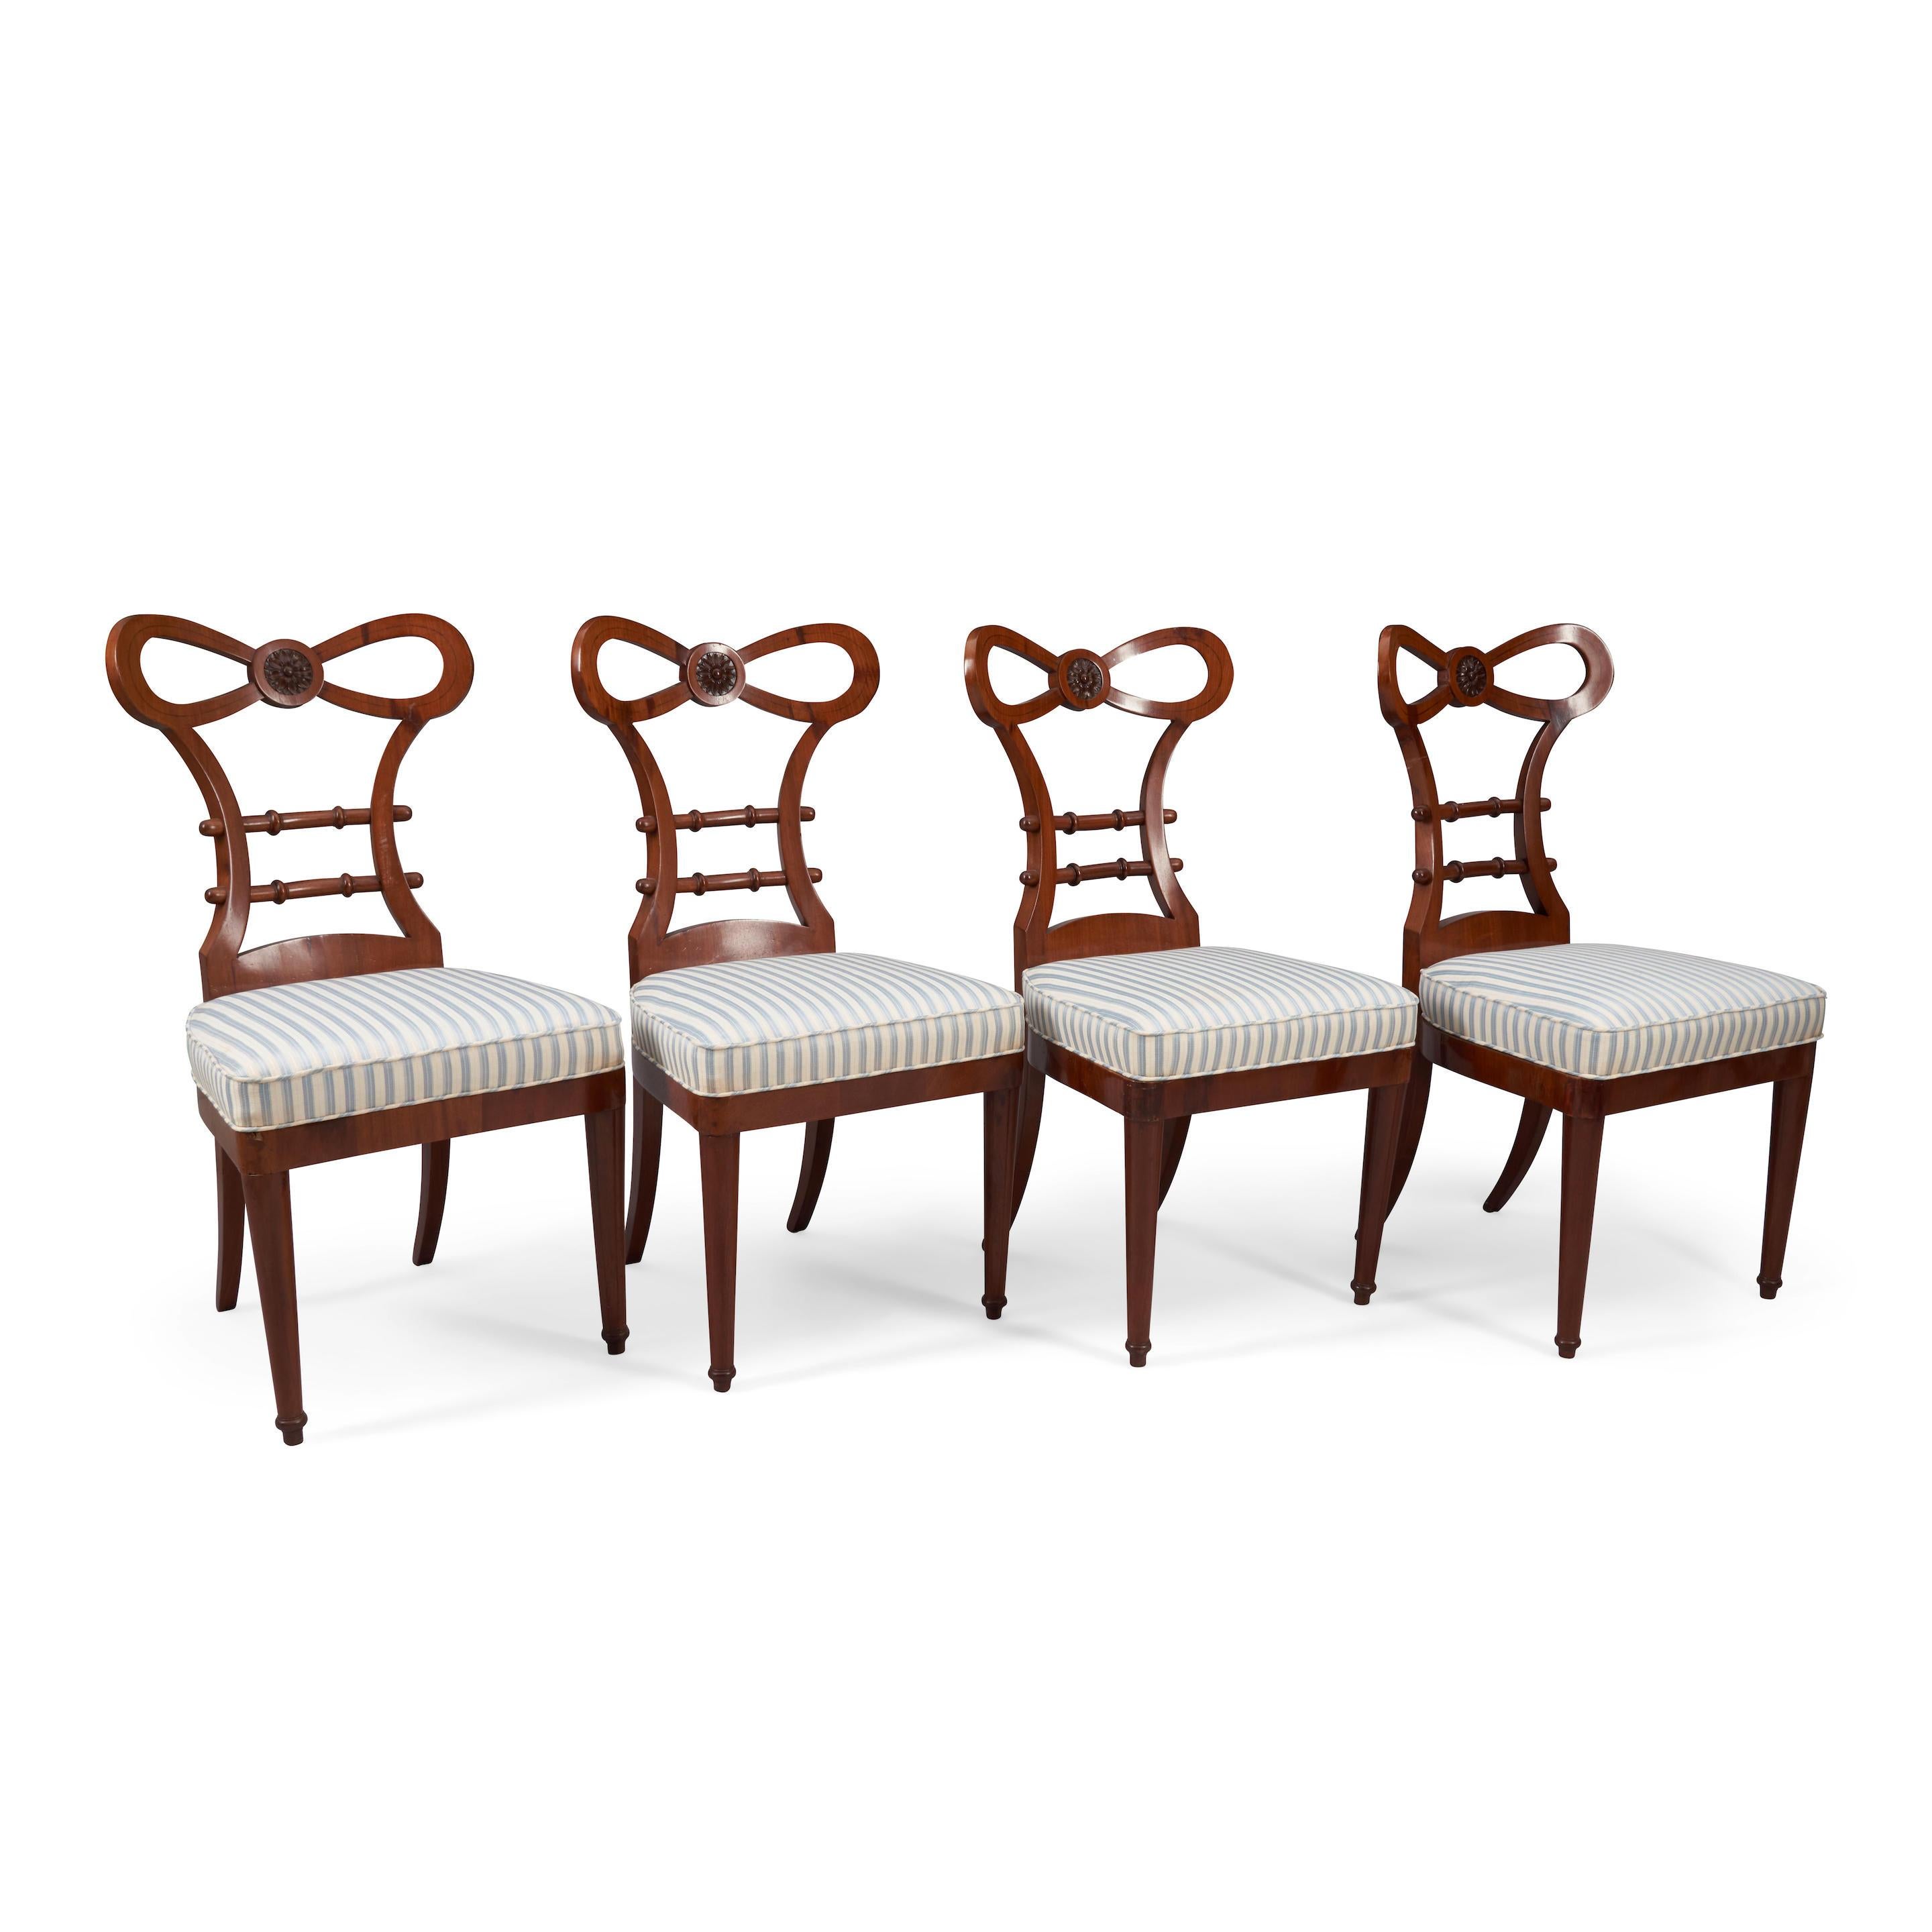 SET OF FOUR BIEDERMEIER WALNUT SIDE CHAIRS
• Germany or Austria
• 19th century
• The bow forms the top rail with central paterae
• The open back with turned horizontal stiles
• Upholstered slip-in seat above turned tapered legs in the front and